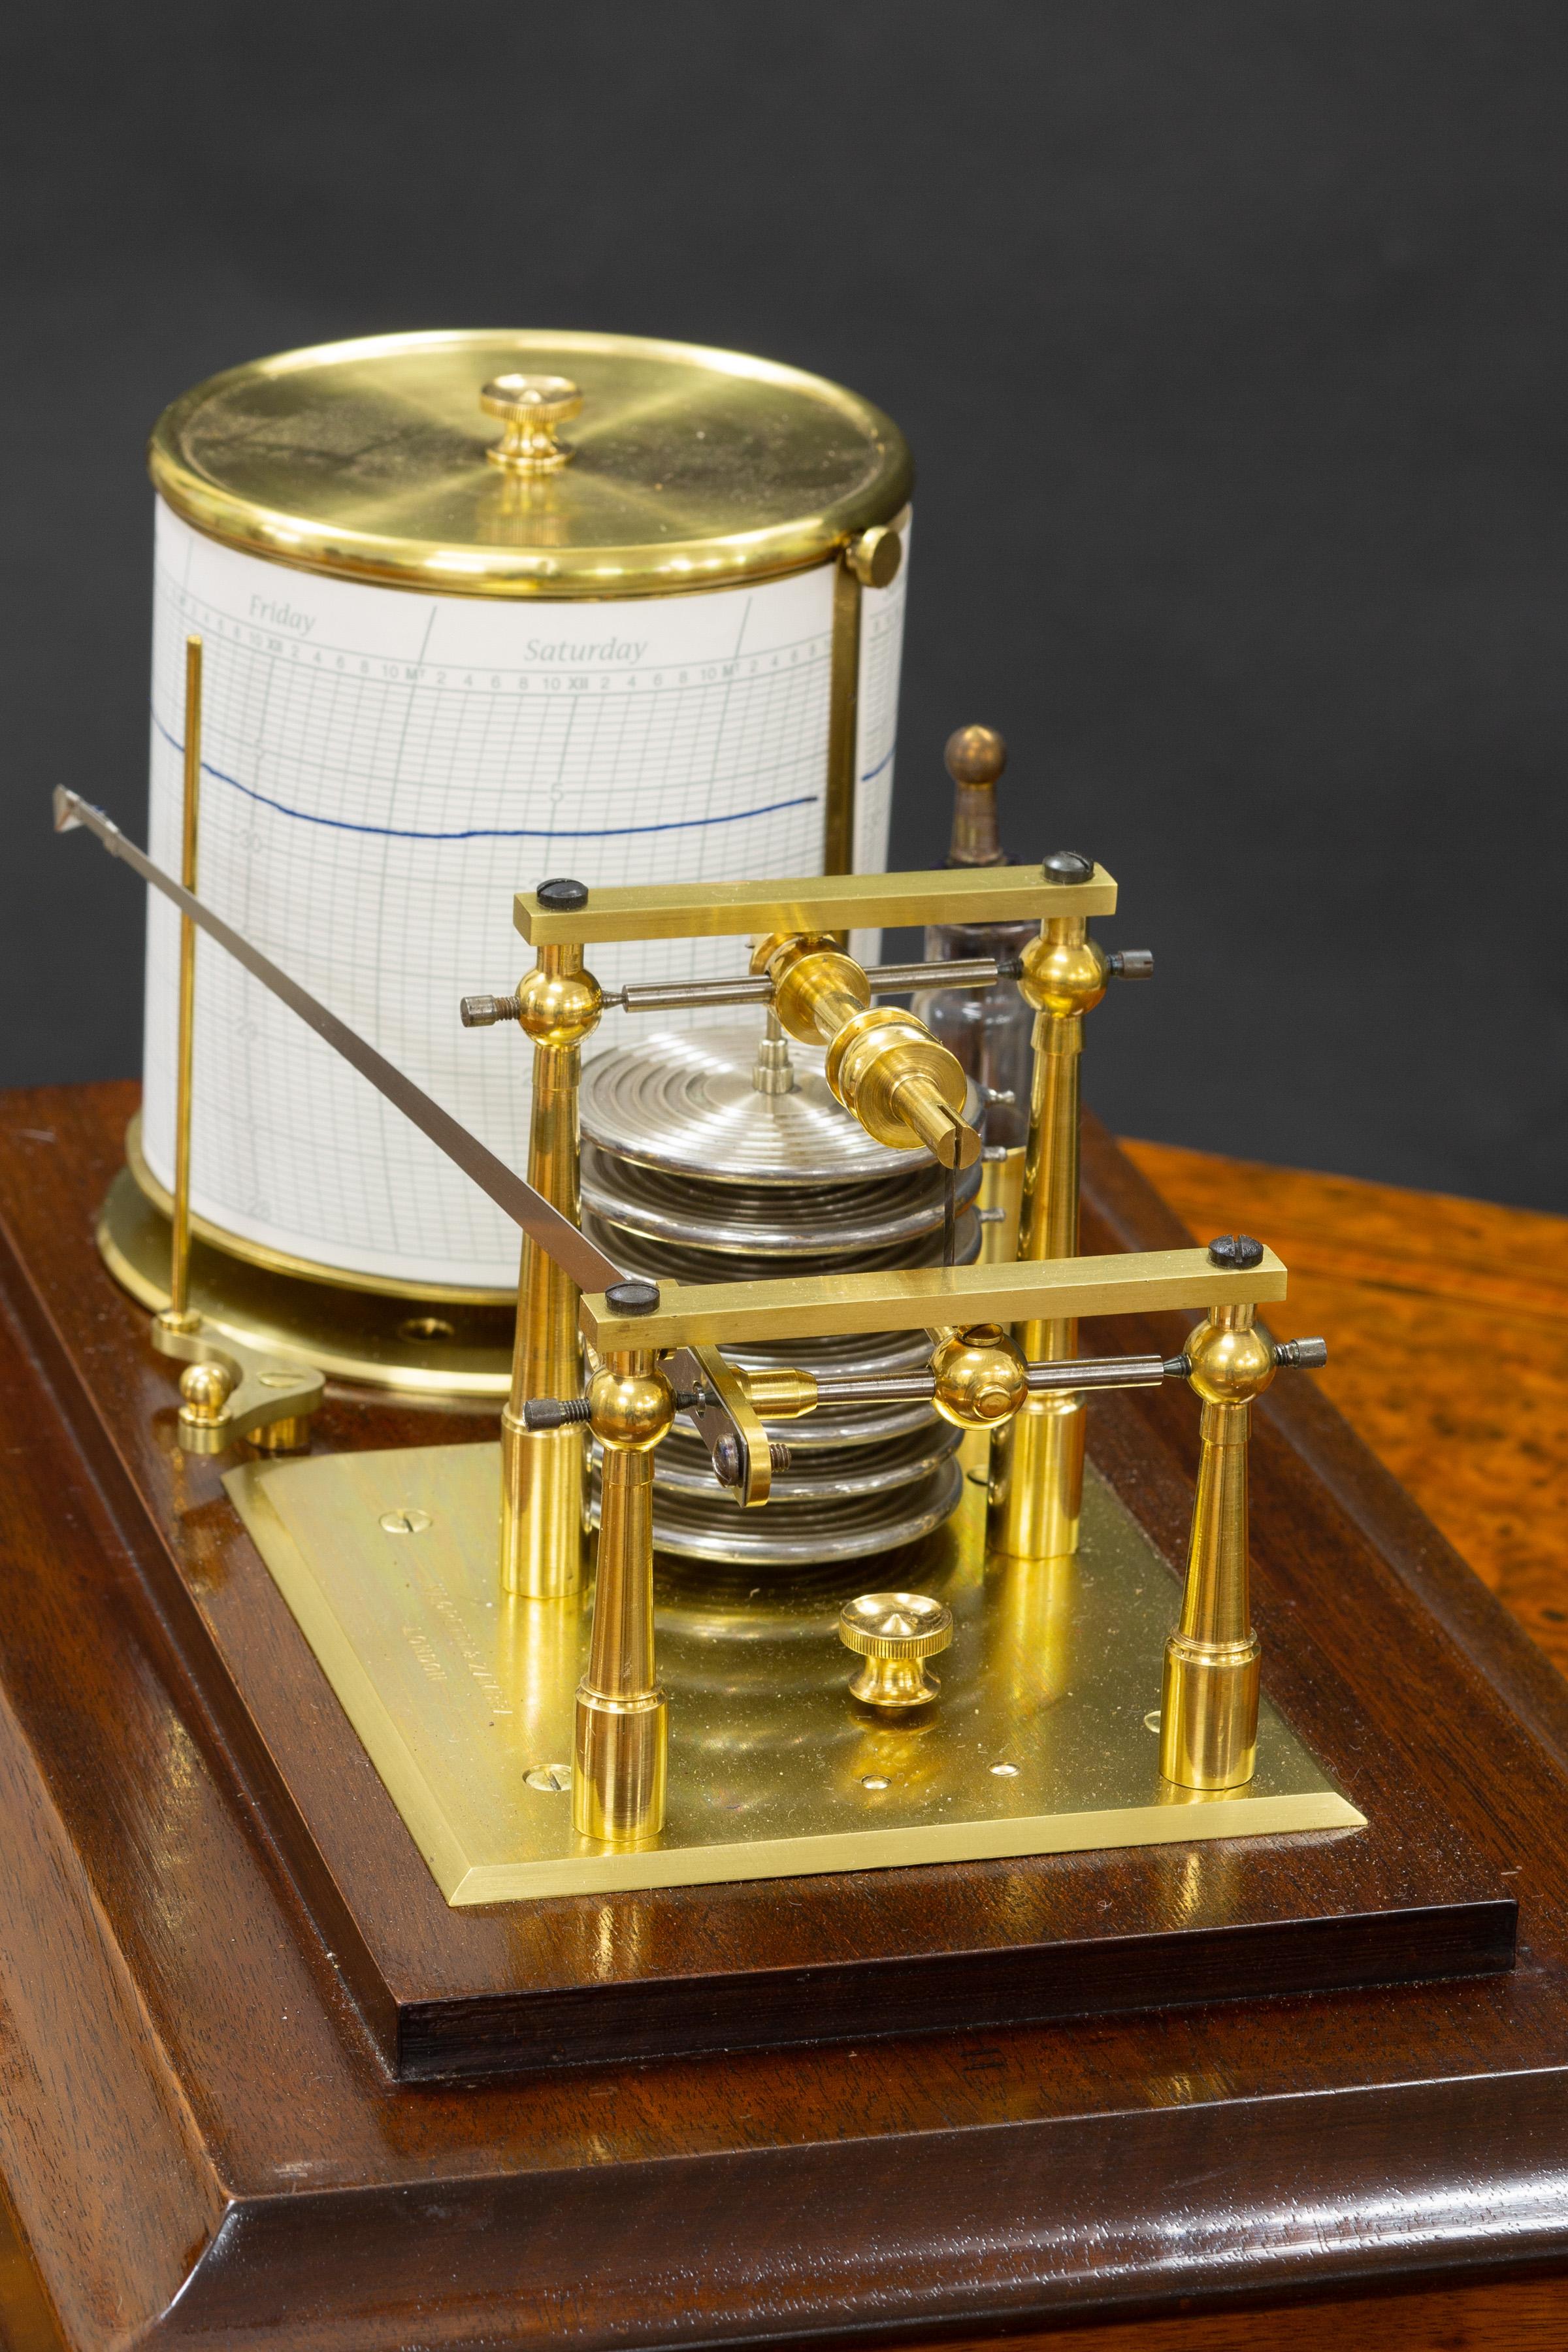 Negretti & Zambra



Fine Edwardian mahogany cased barograph with beveled glass panels and central chart drawer.

Seven vacuum chambers linking the recording arm to the eight day revolving drum with lever escapement.

Original ink bottle and